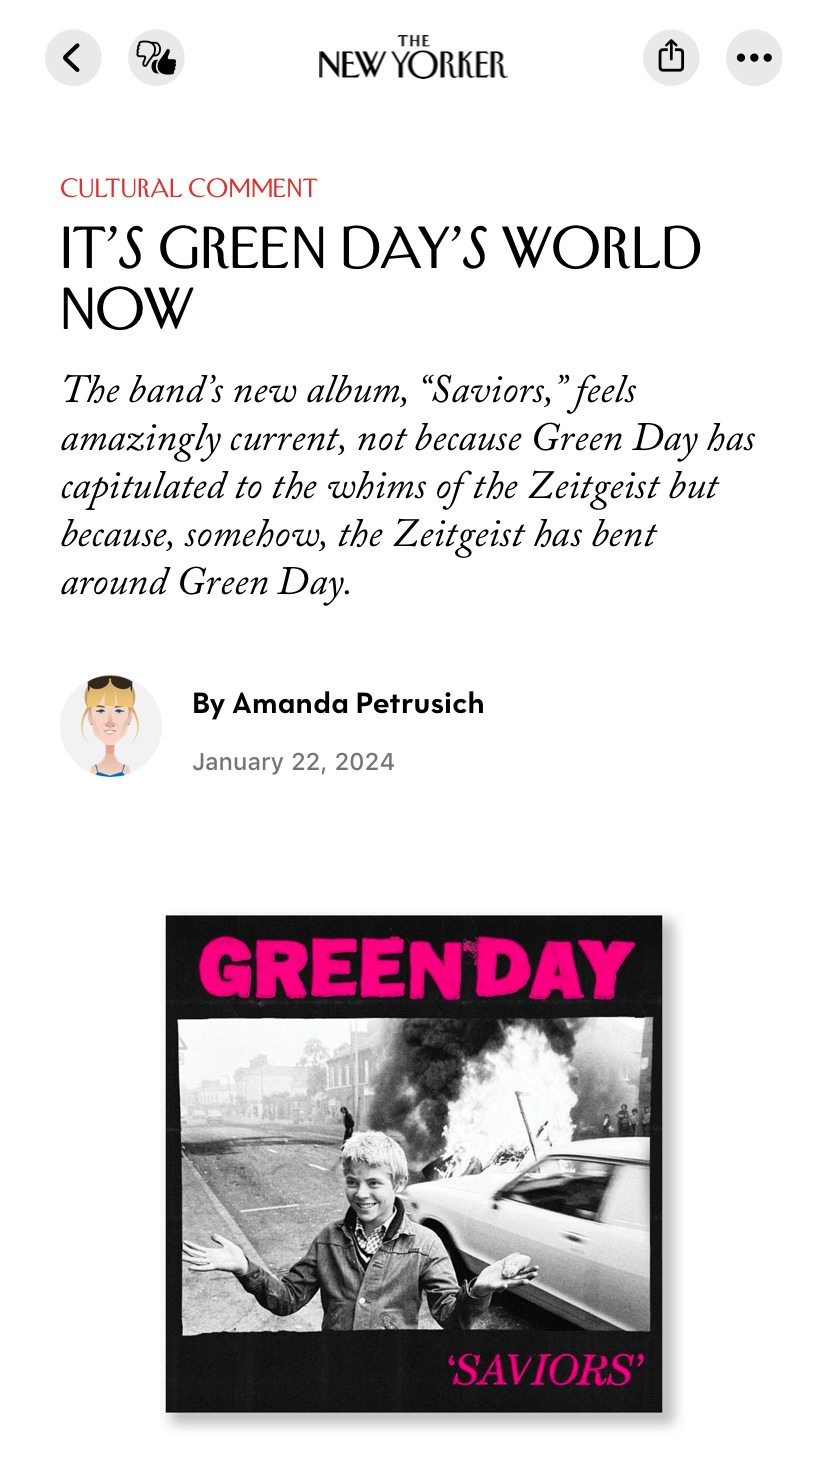 Green Day’s new album Saviors reviewed on The New Yorker